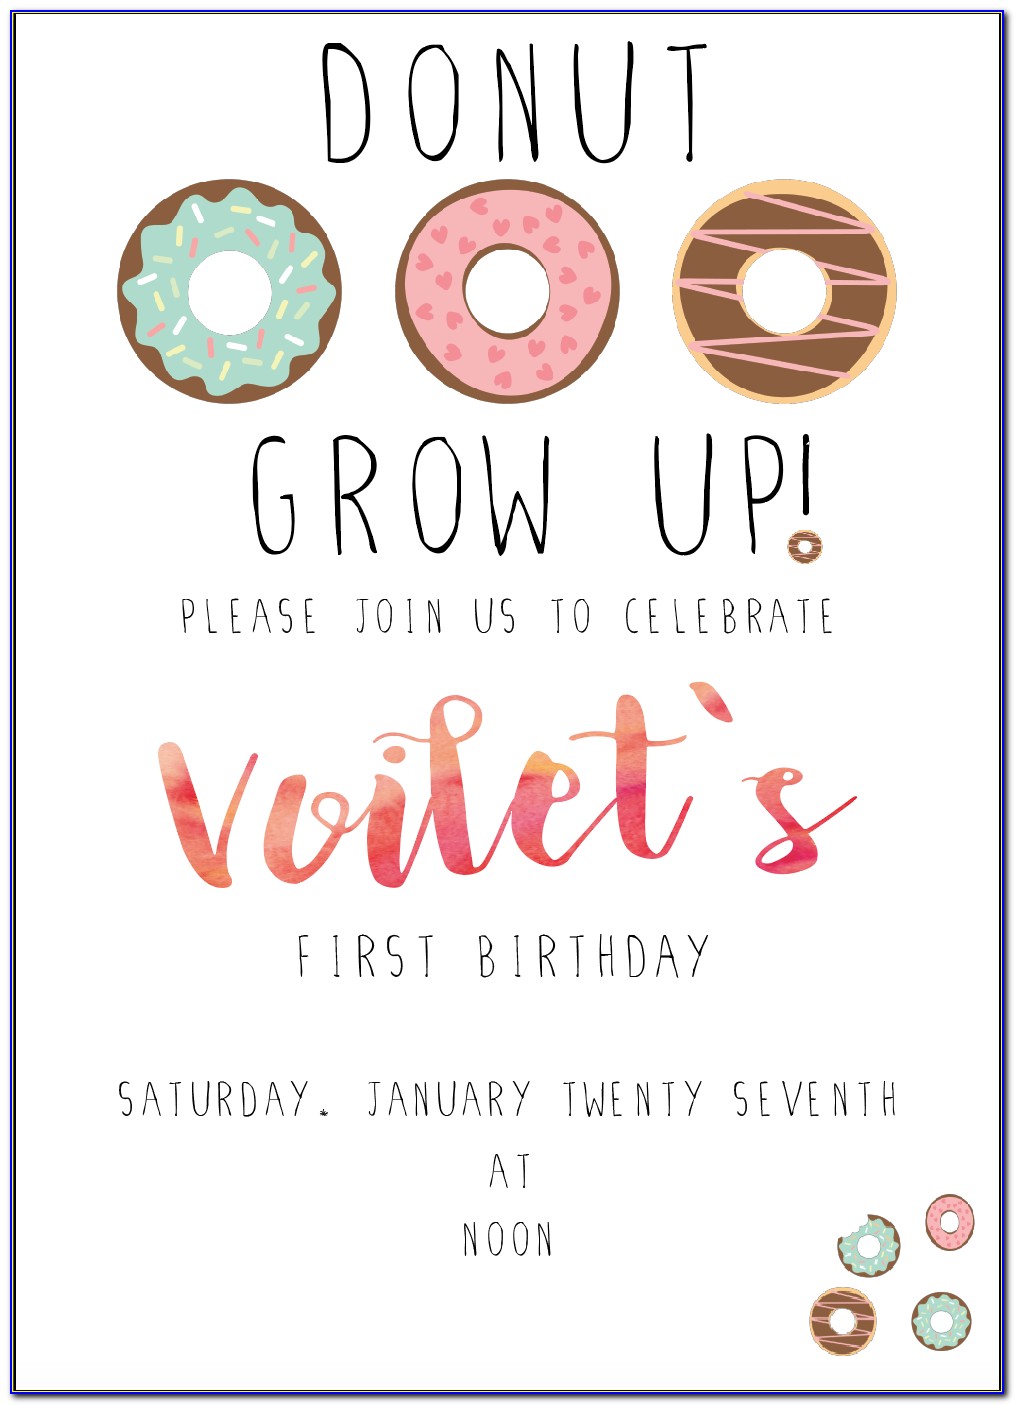 Donut Grow Up Online Invitations